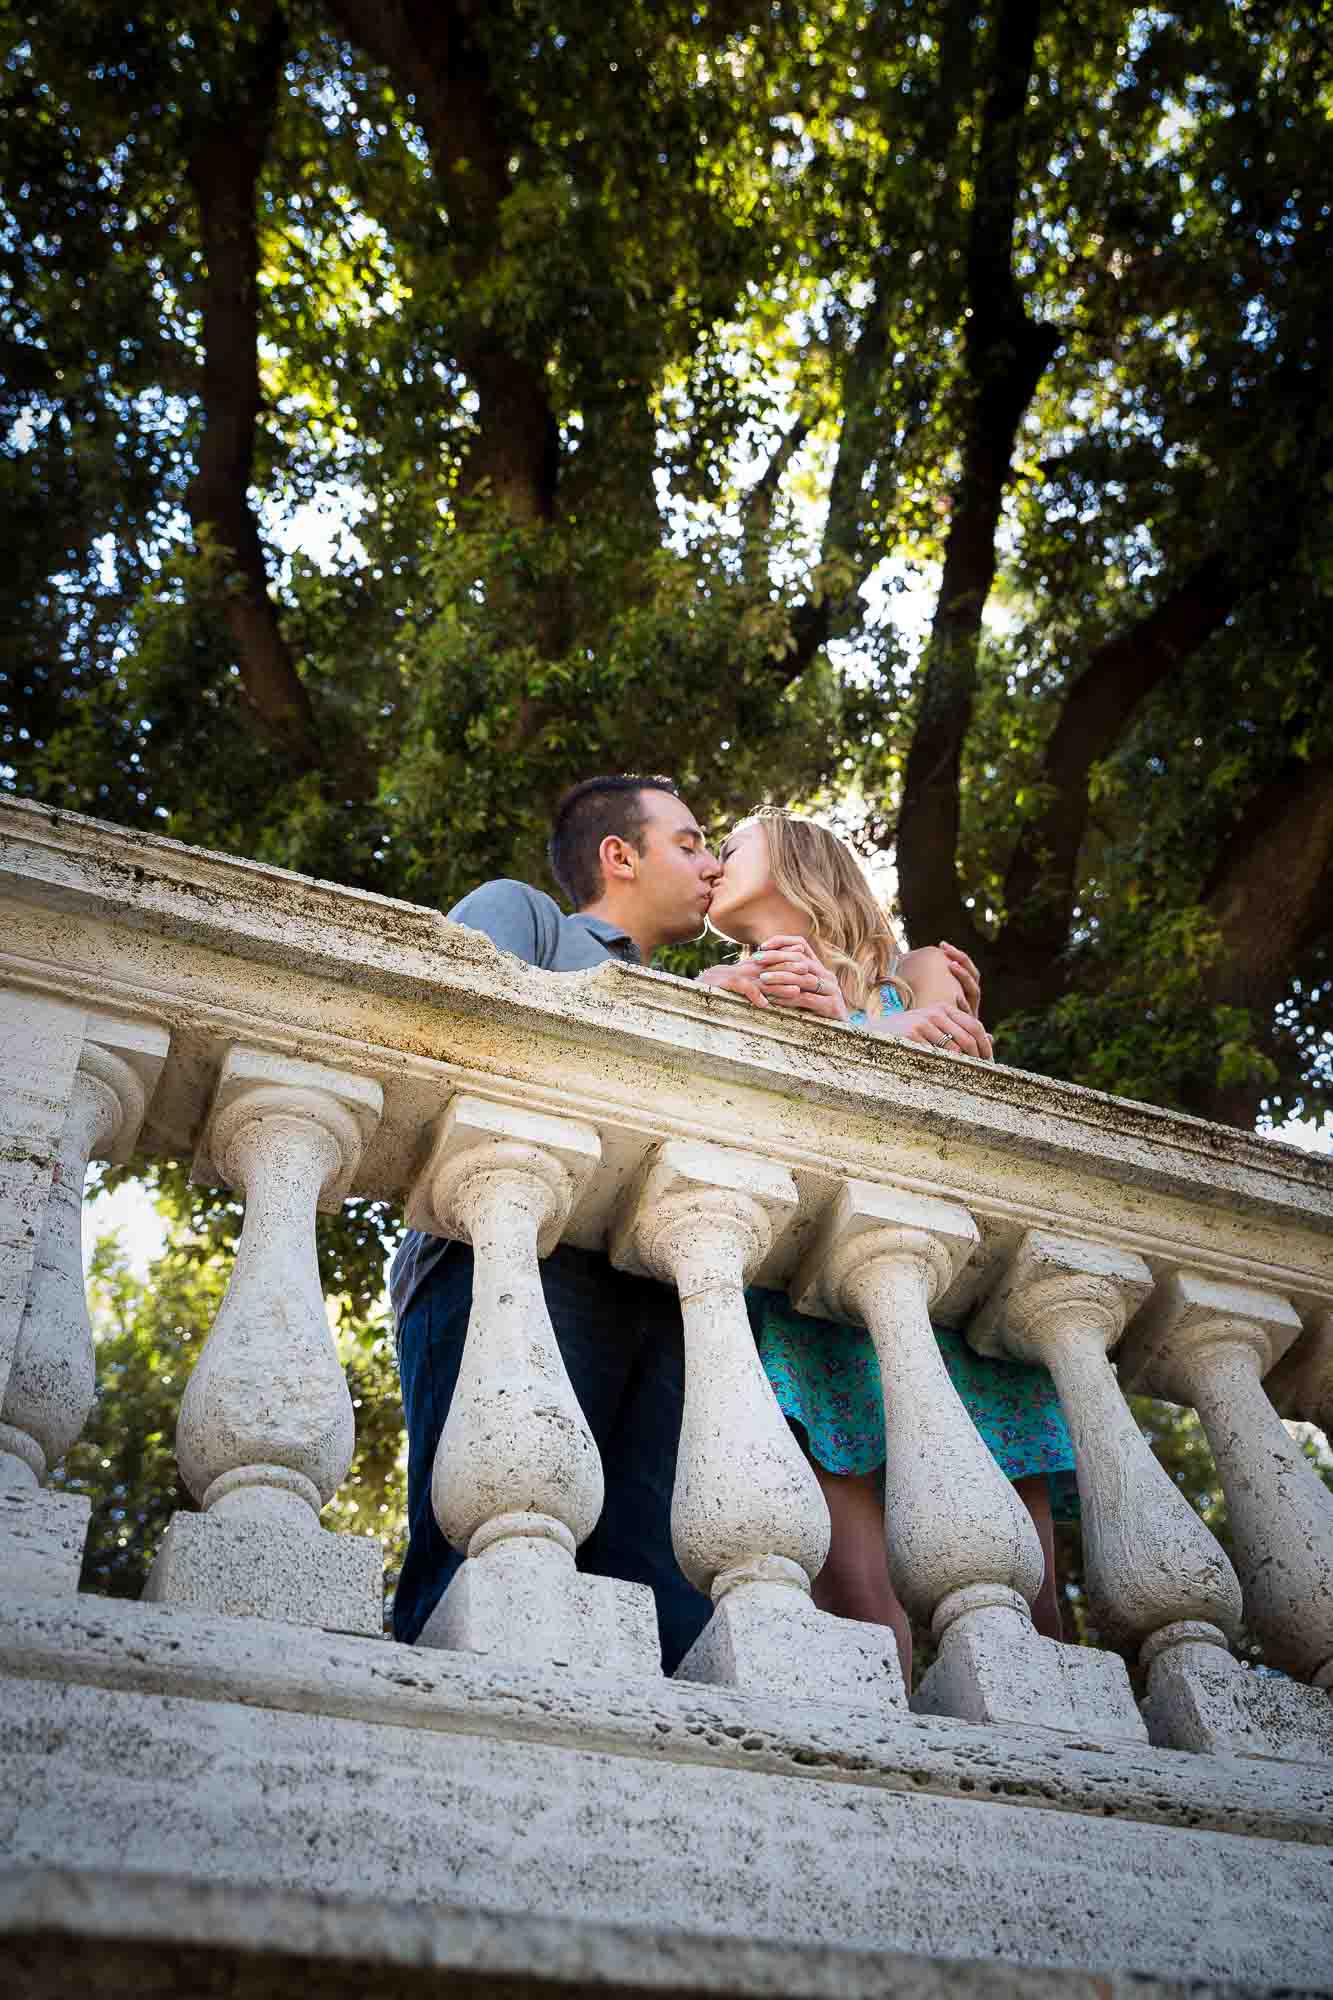 Romantically in love in Rome during an e-session at Pincio park.